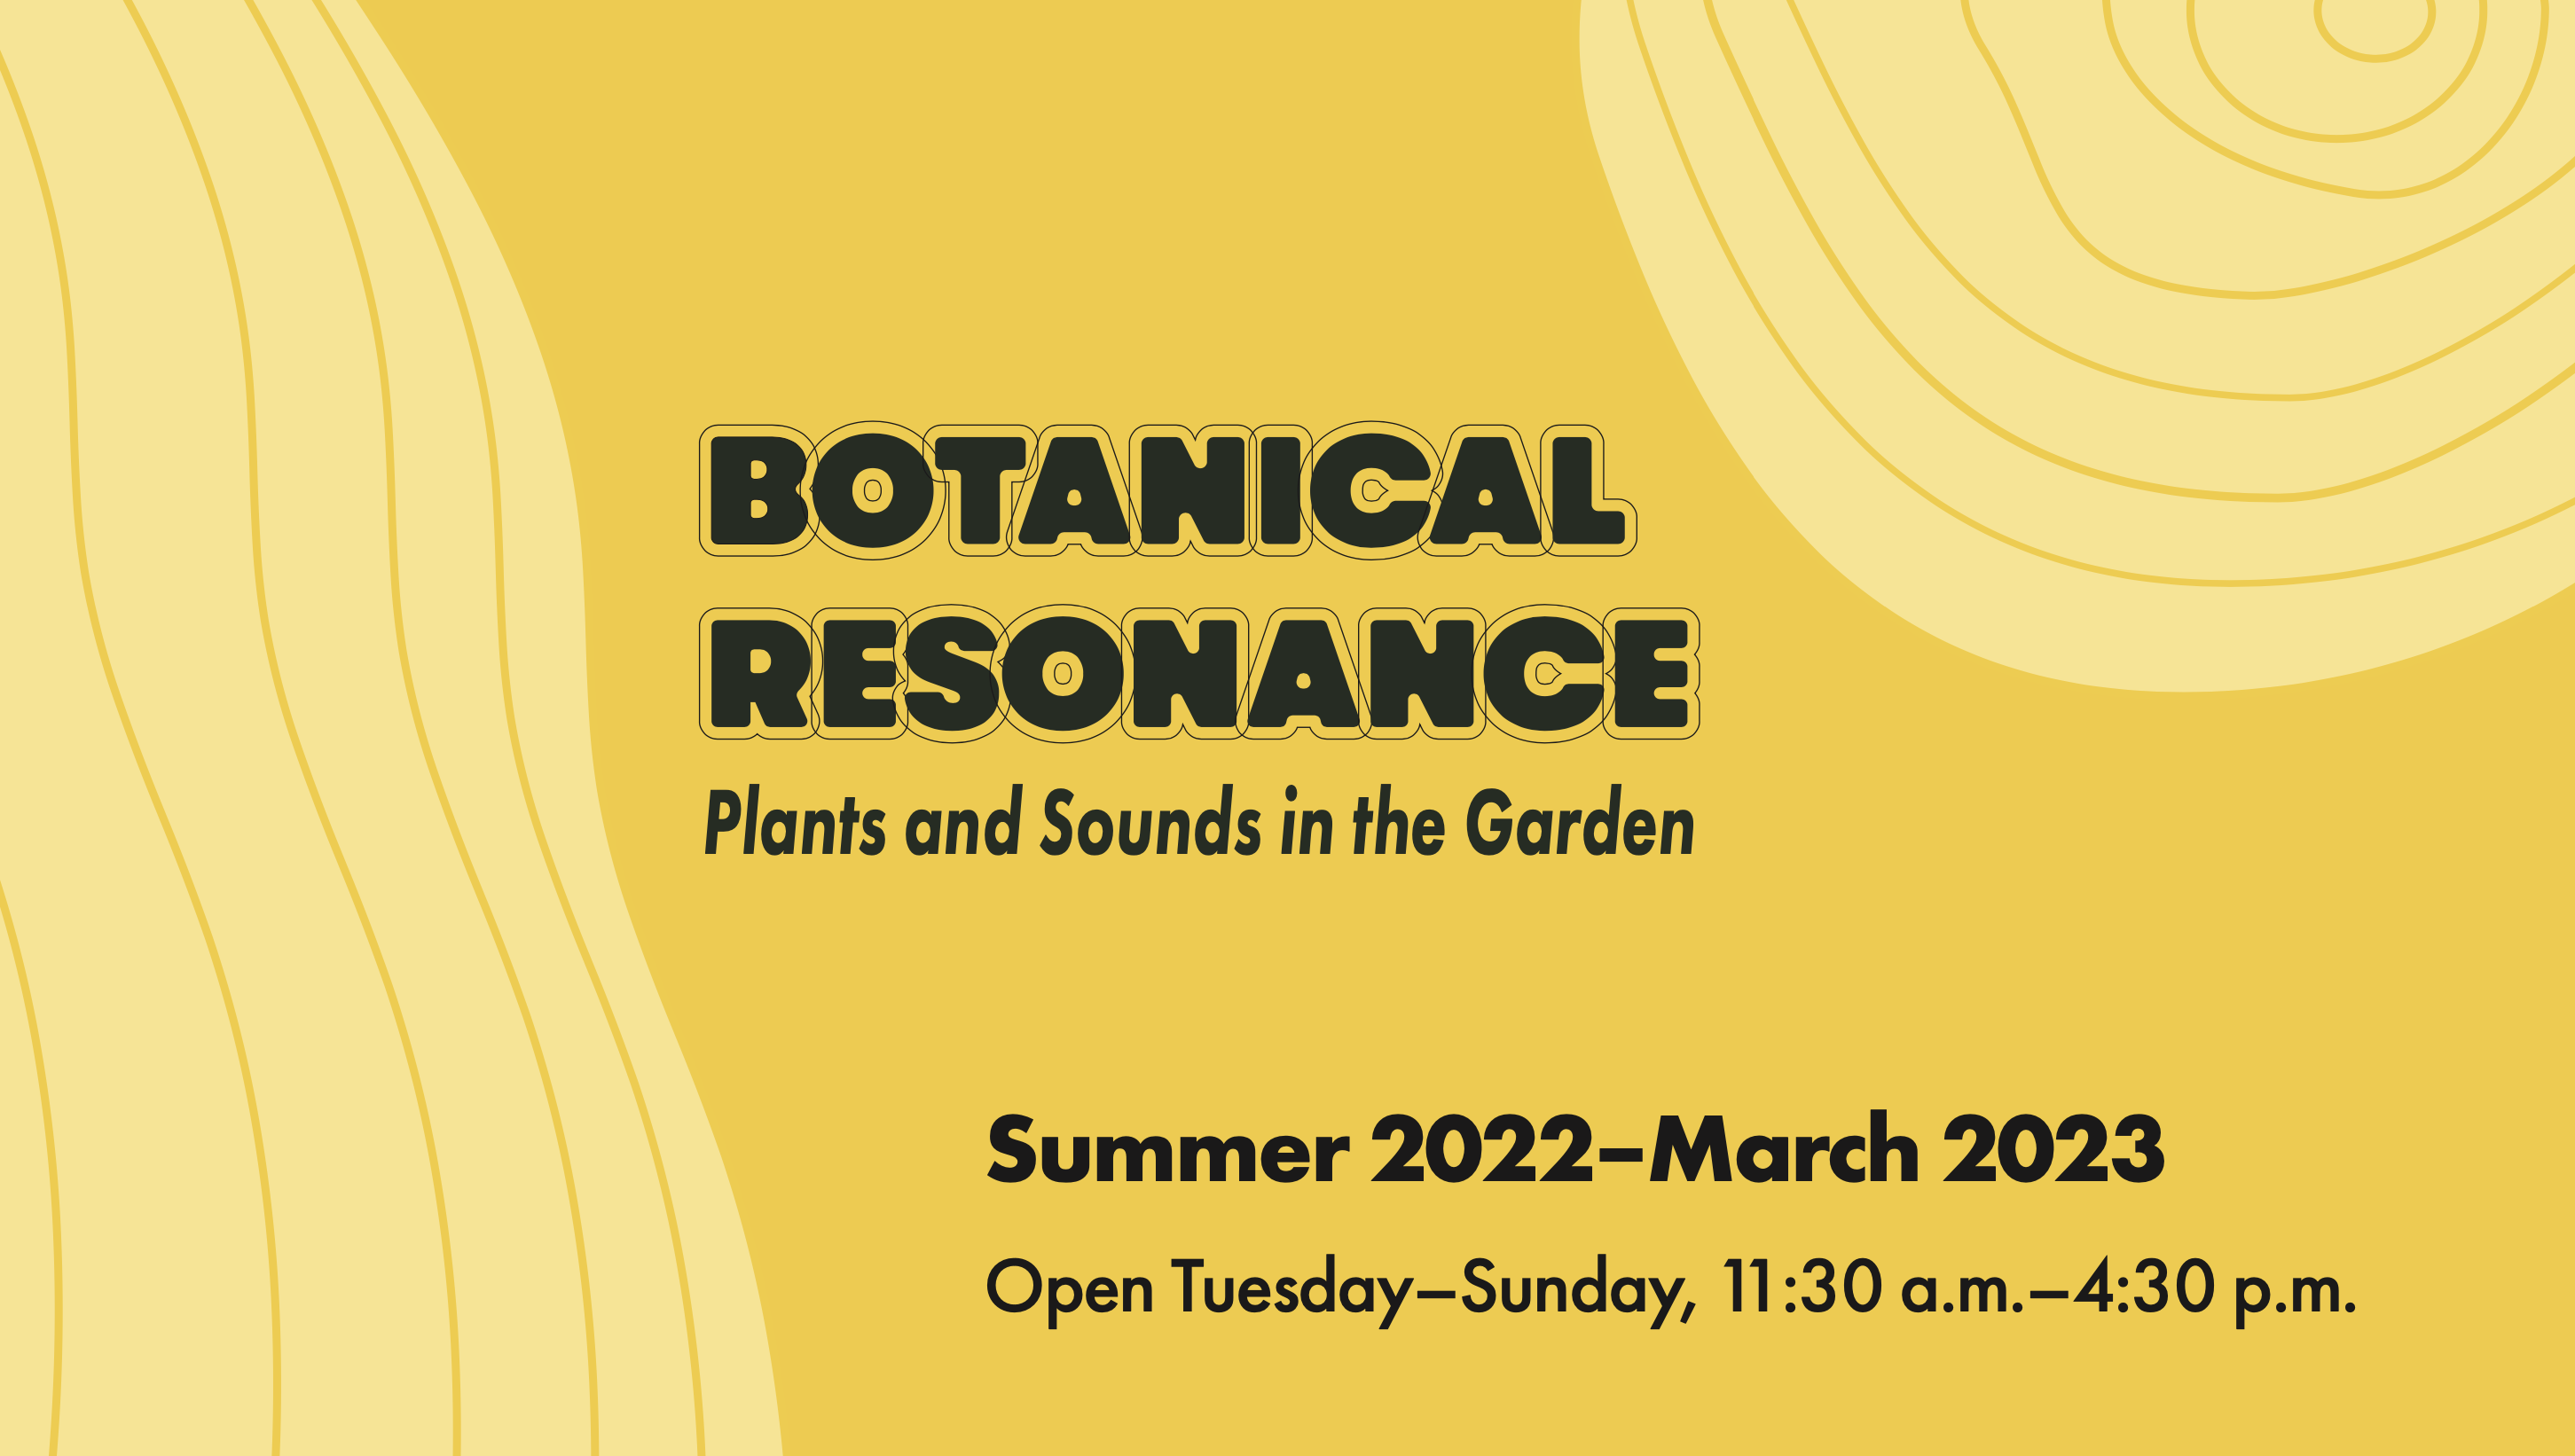 Botanical Resonance: Plants and Sounds in the Garden | Summer 2022-March 2023 | Open Tuesday-Sunday, 11:30 a.m.–4:30 p.m.